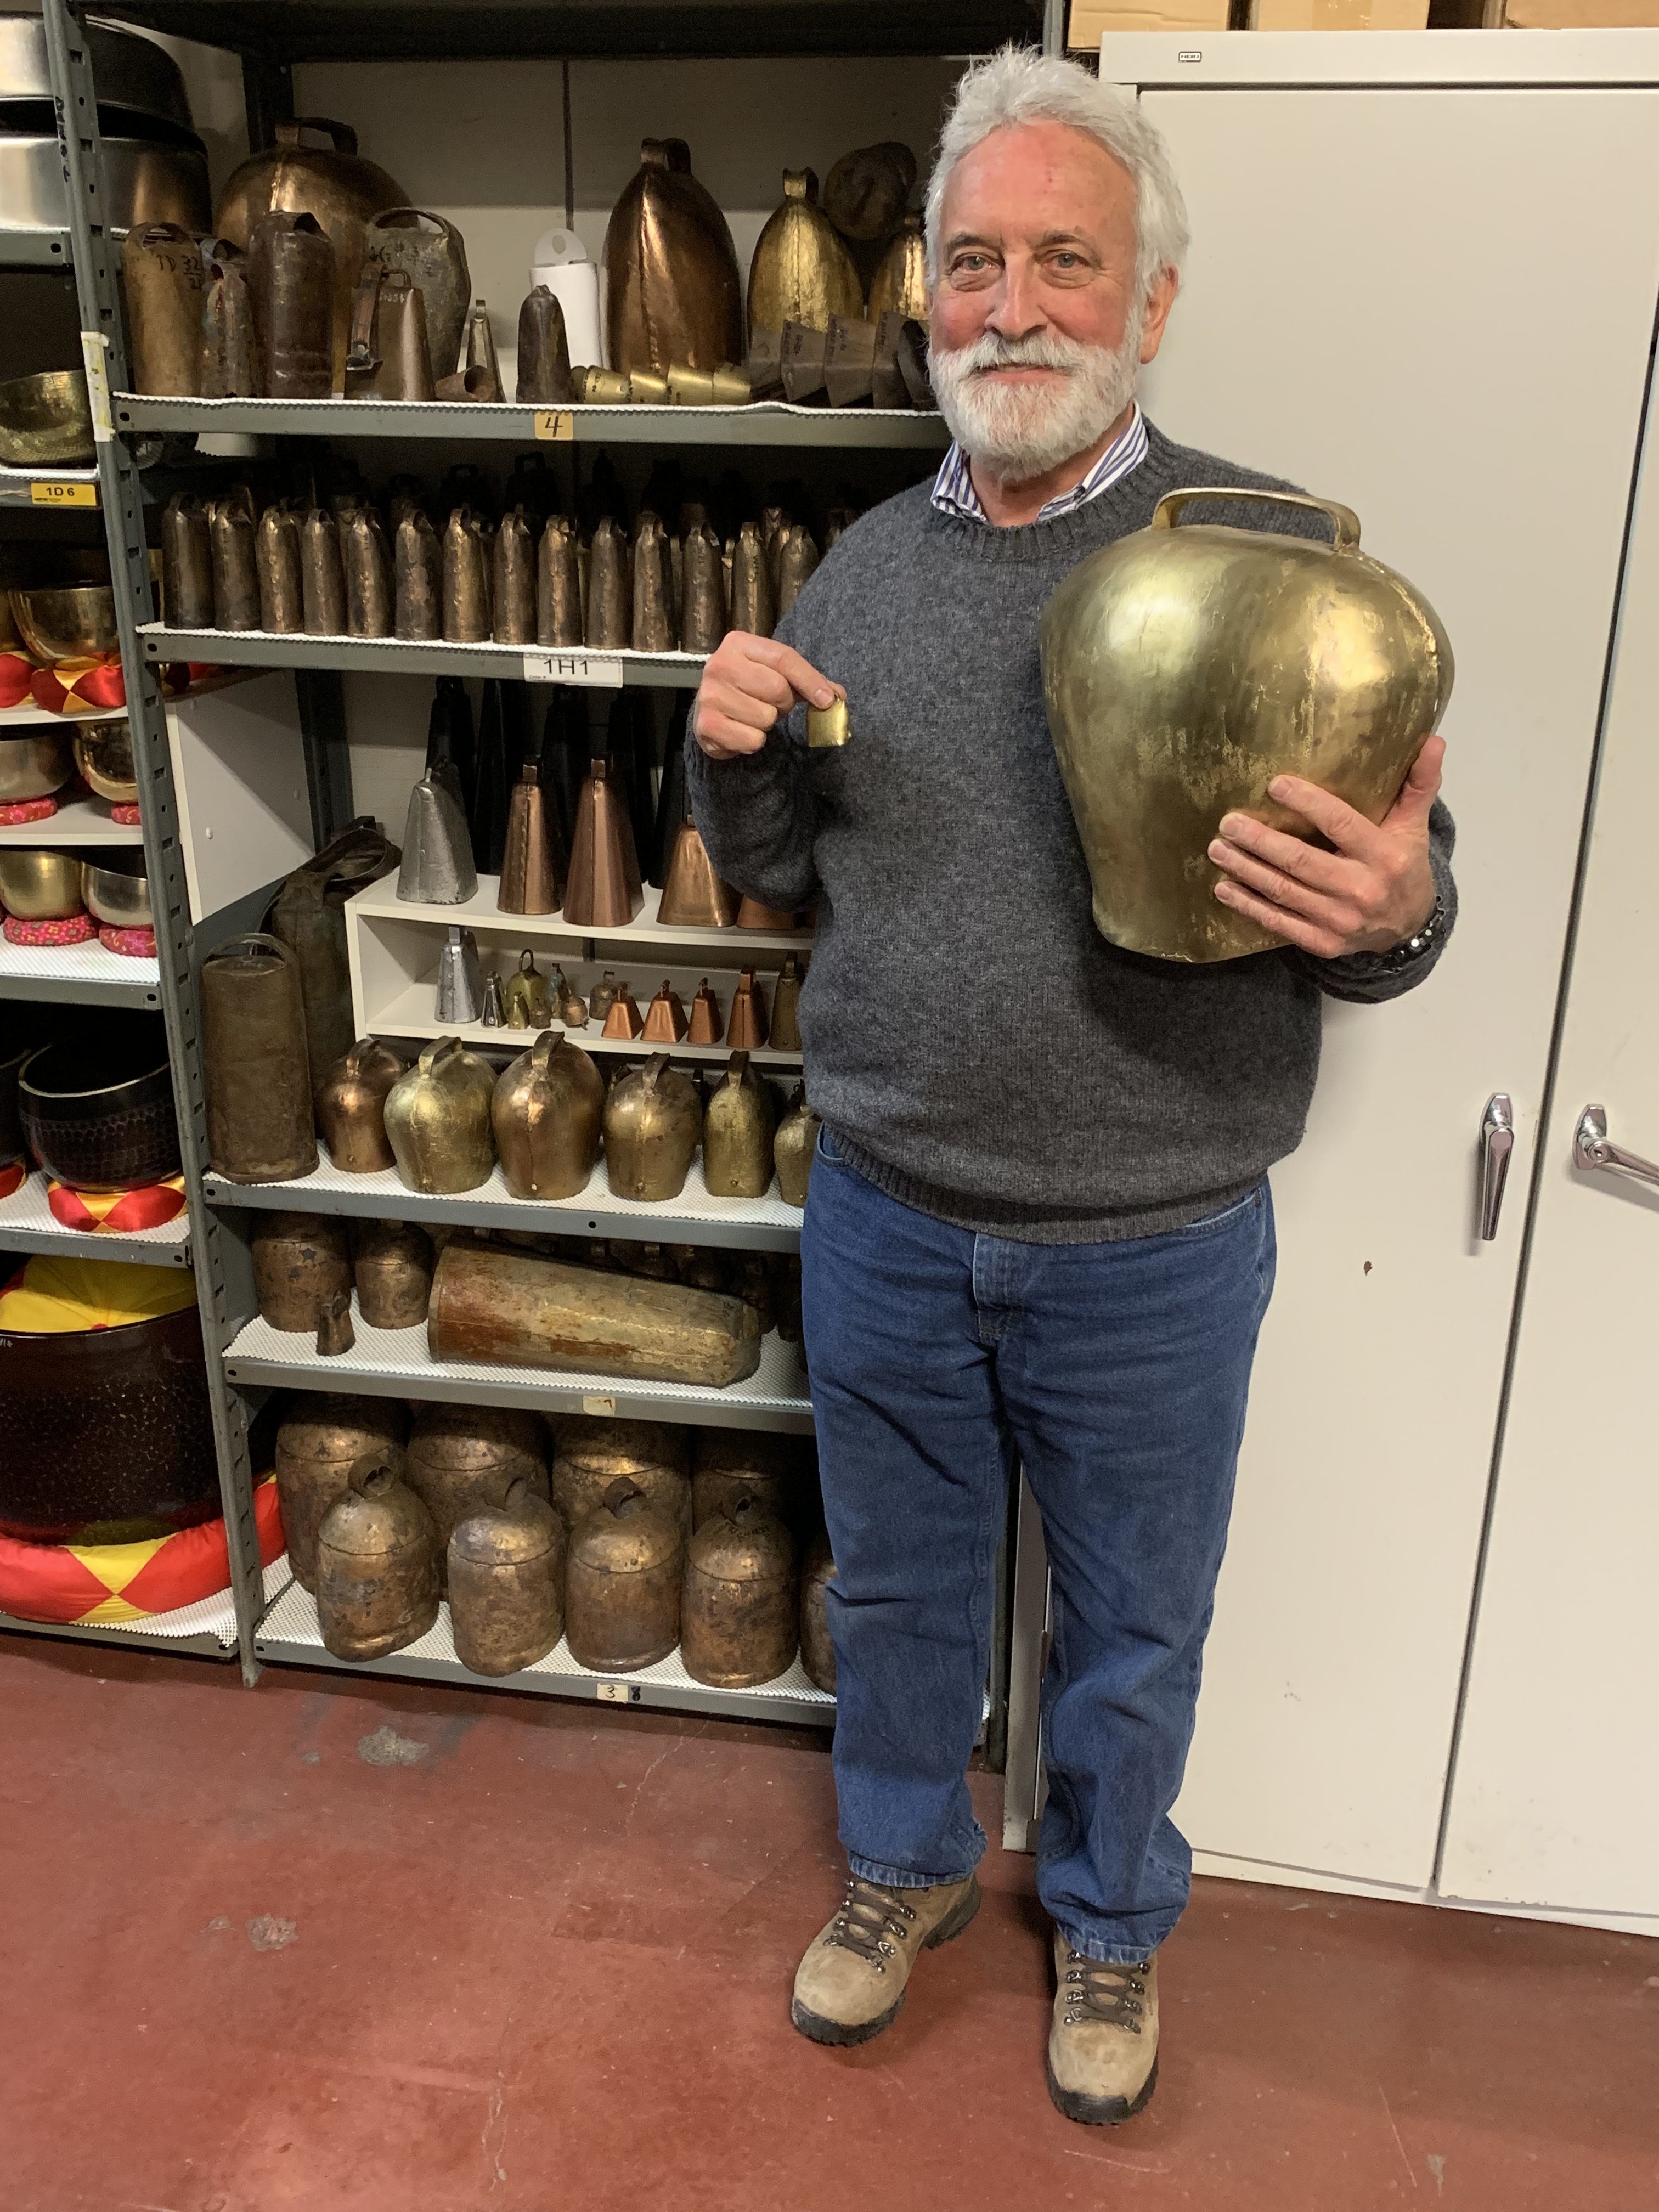 Garry in front of his cowbell collection – Diane says “no more cowbells!